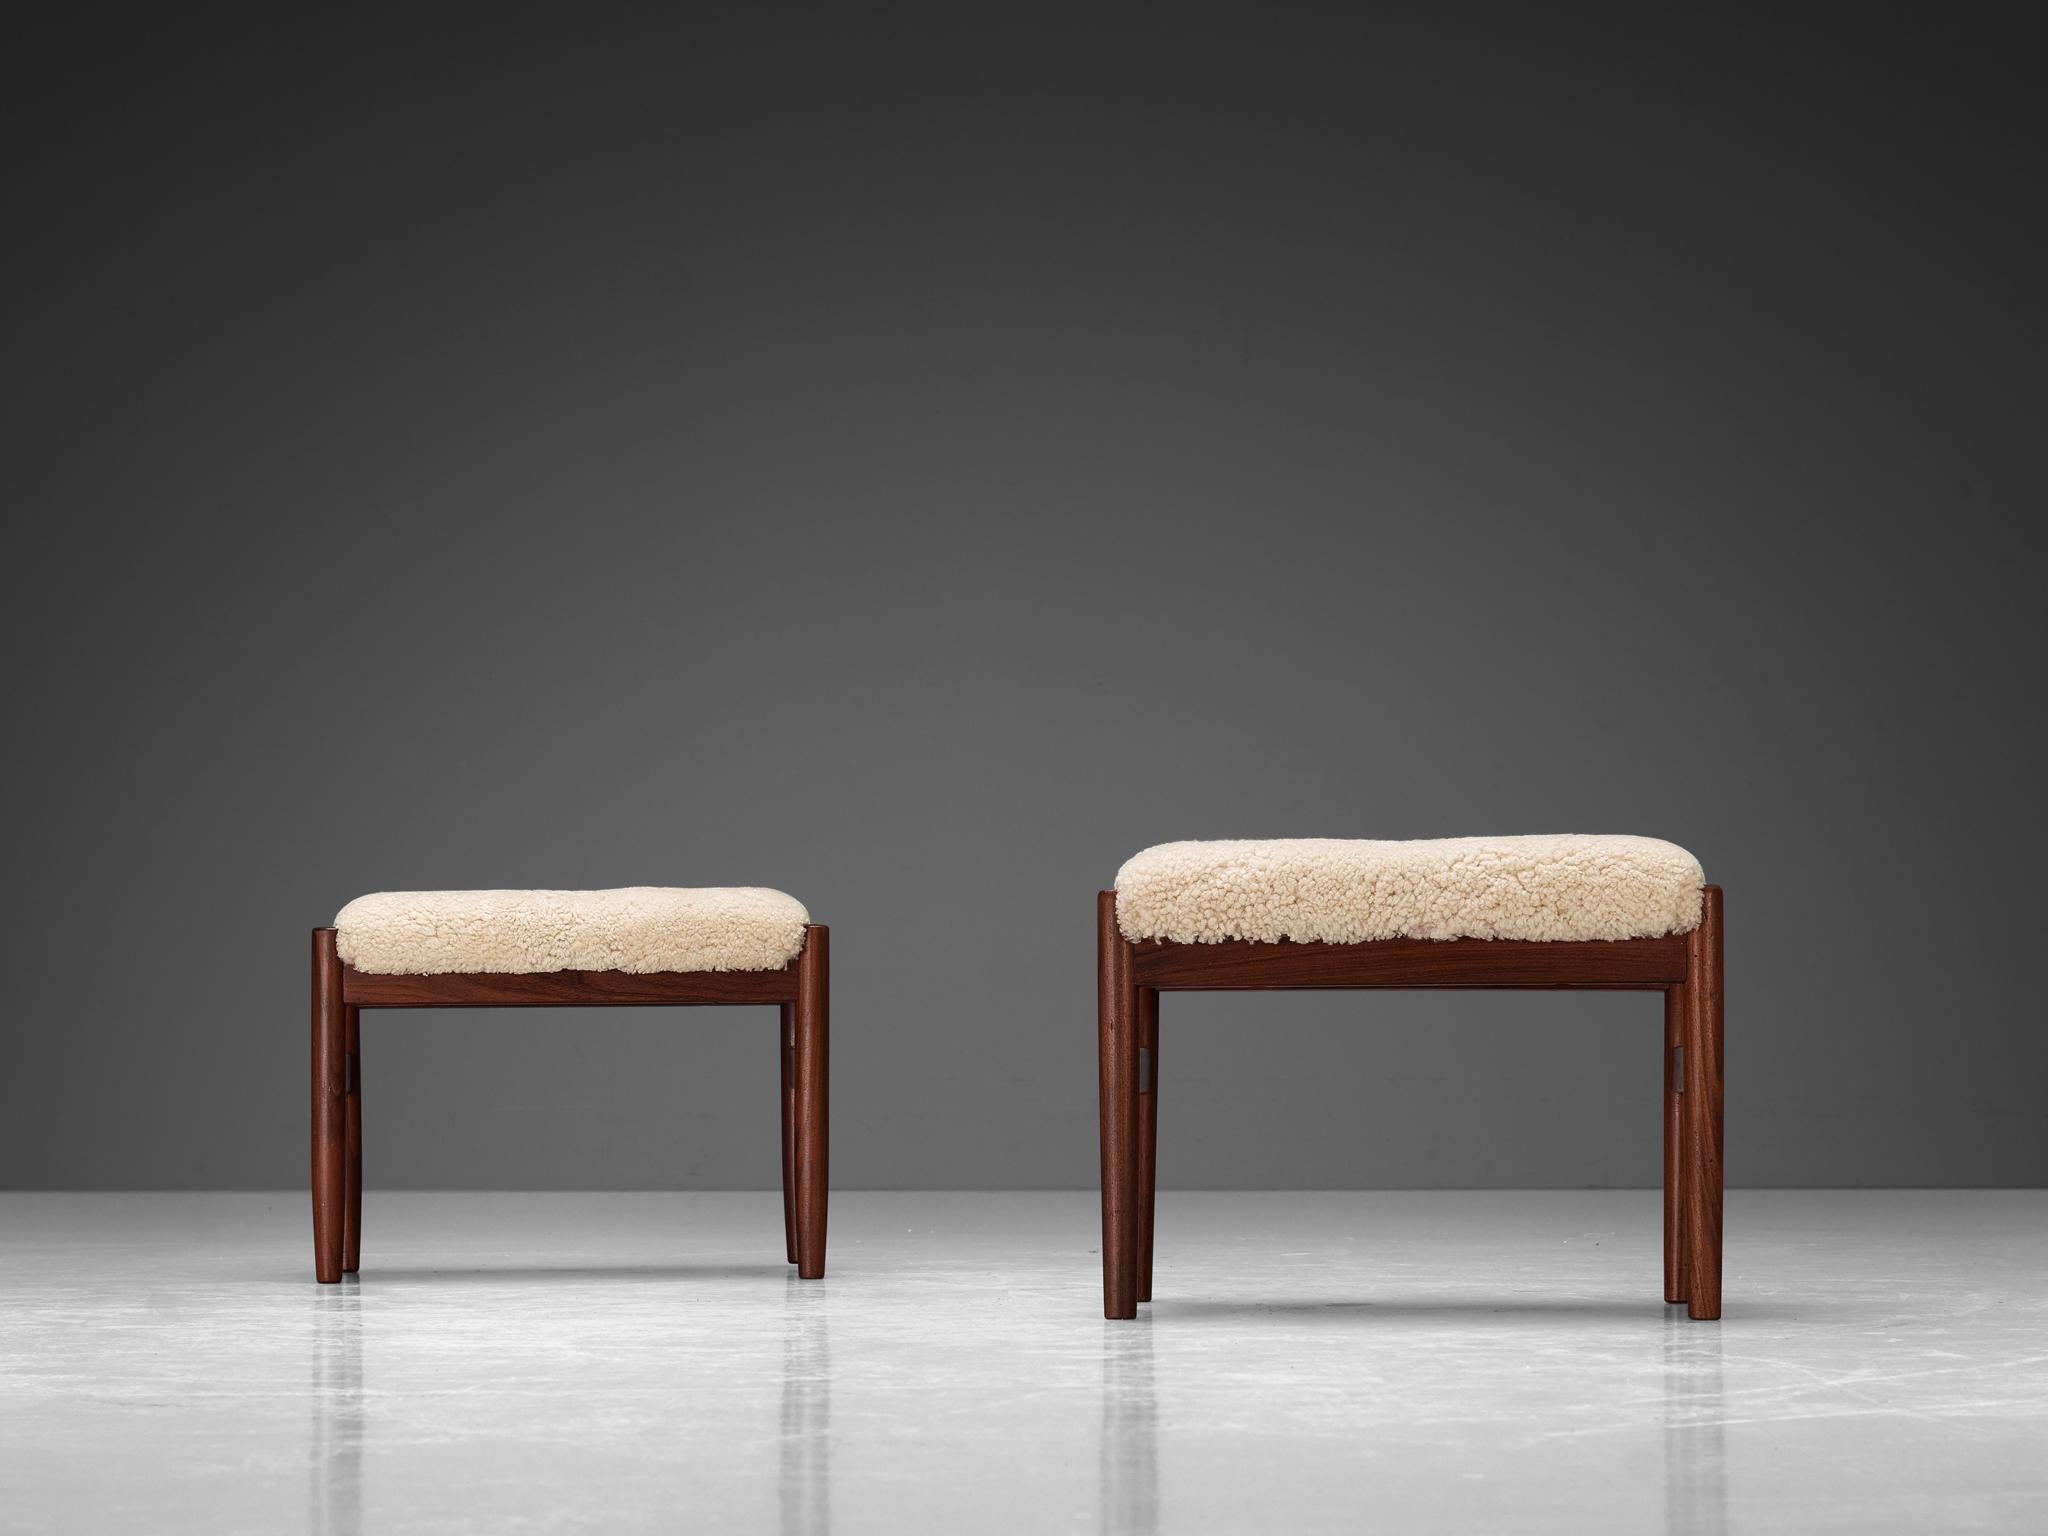 Danish Scandinavian Stools in Teak and Shearling Upholstery  For Sale